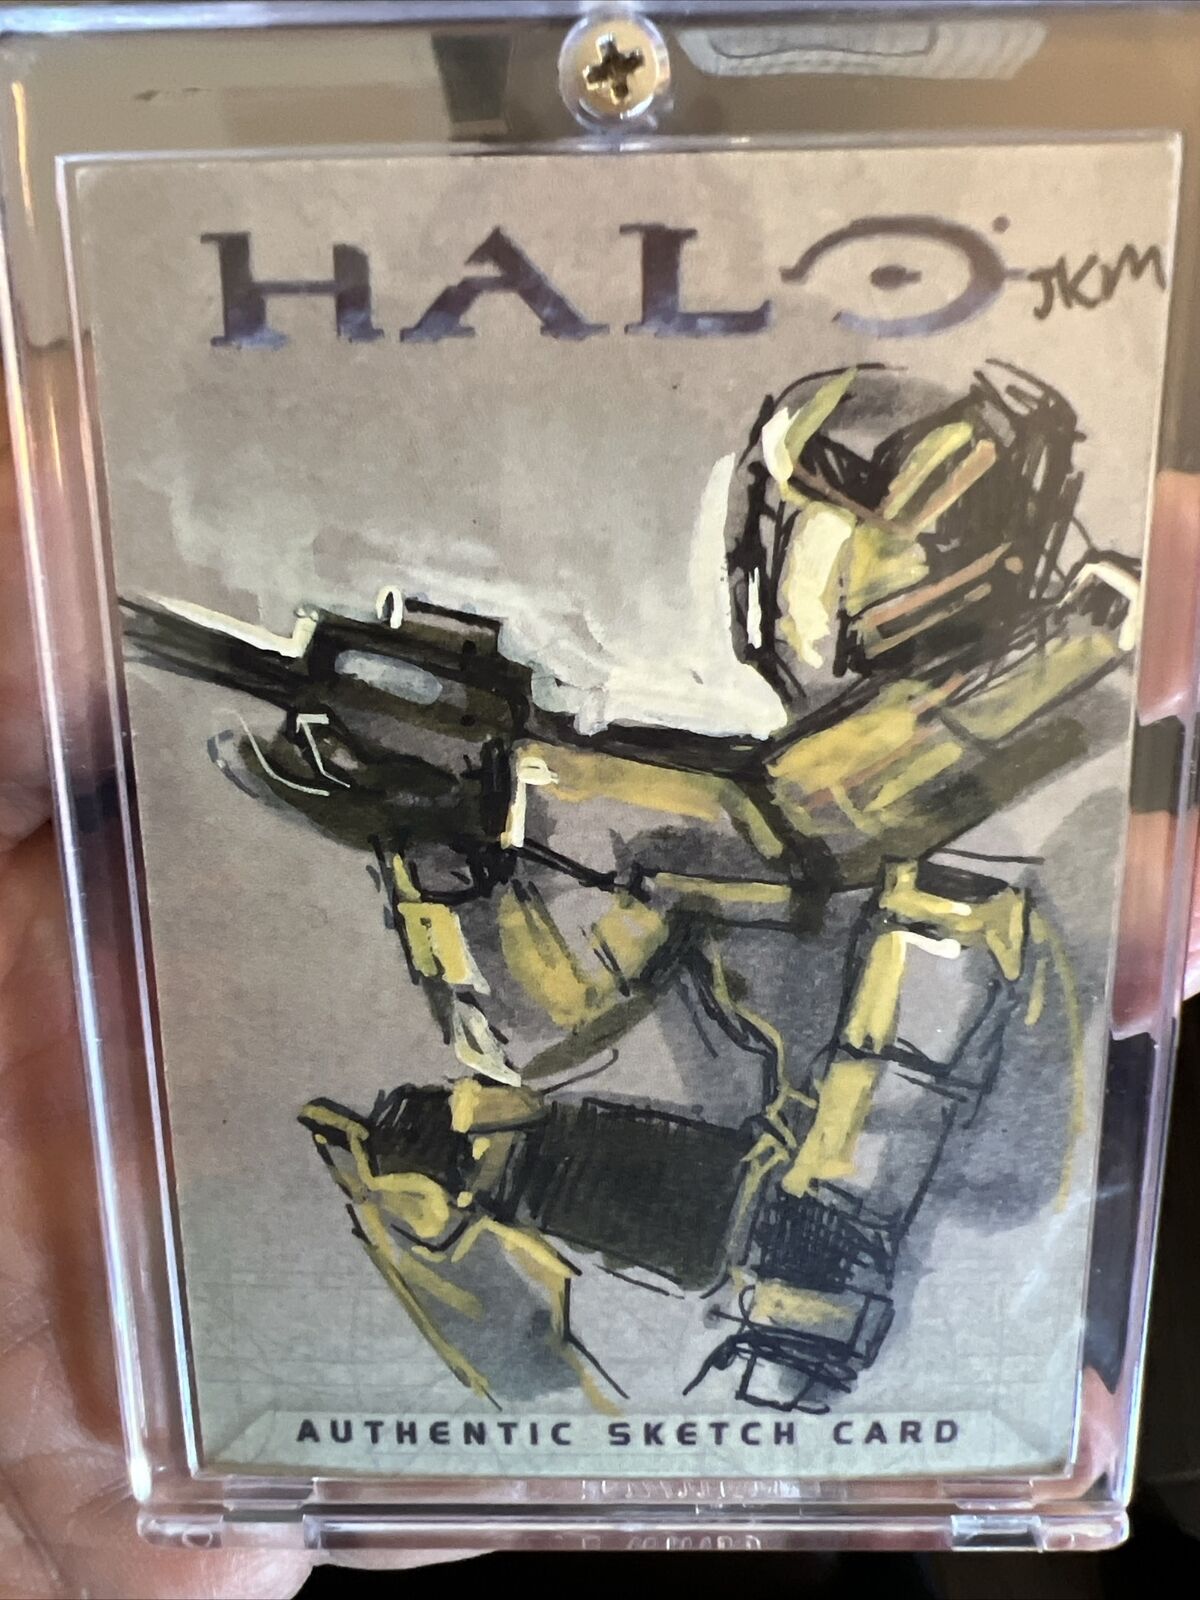 2007 Rare 1/1 Halo Spartan Sketch Trading Card Topps Authentic By Artist JKM